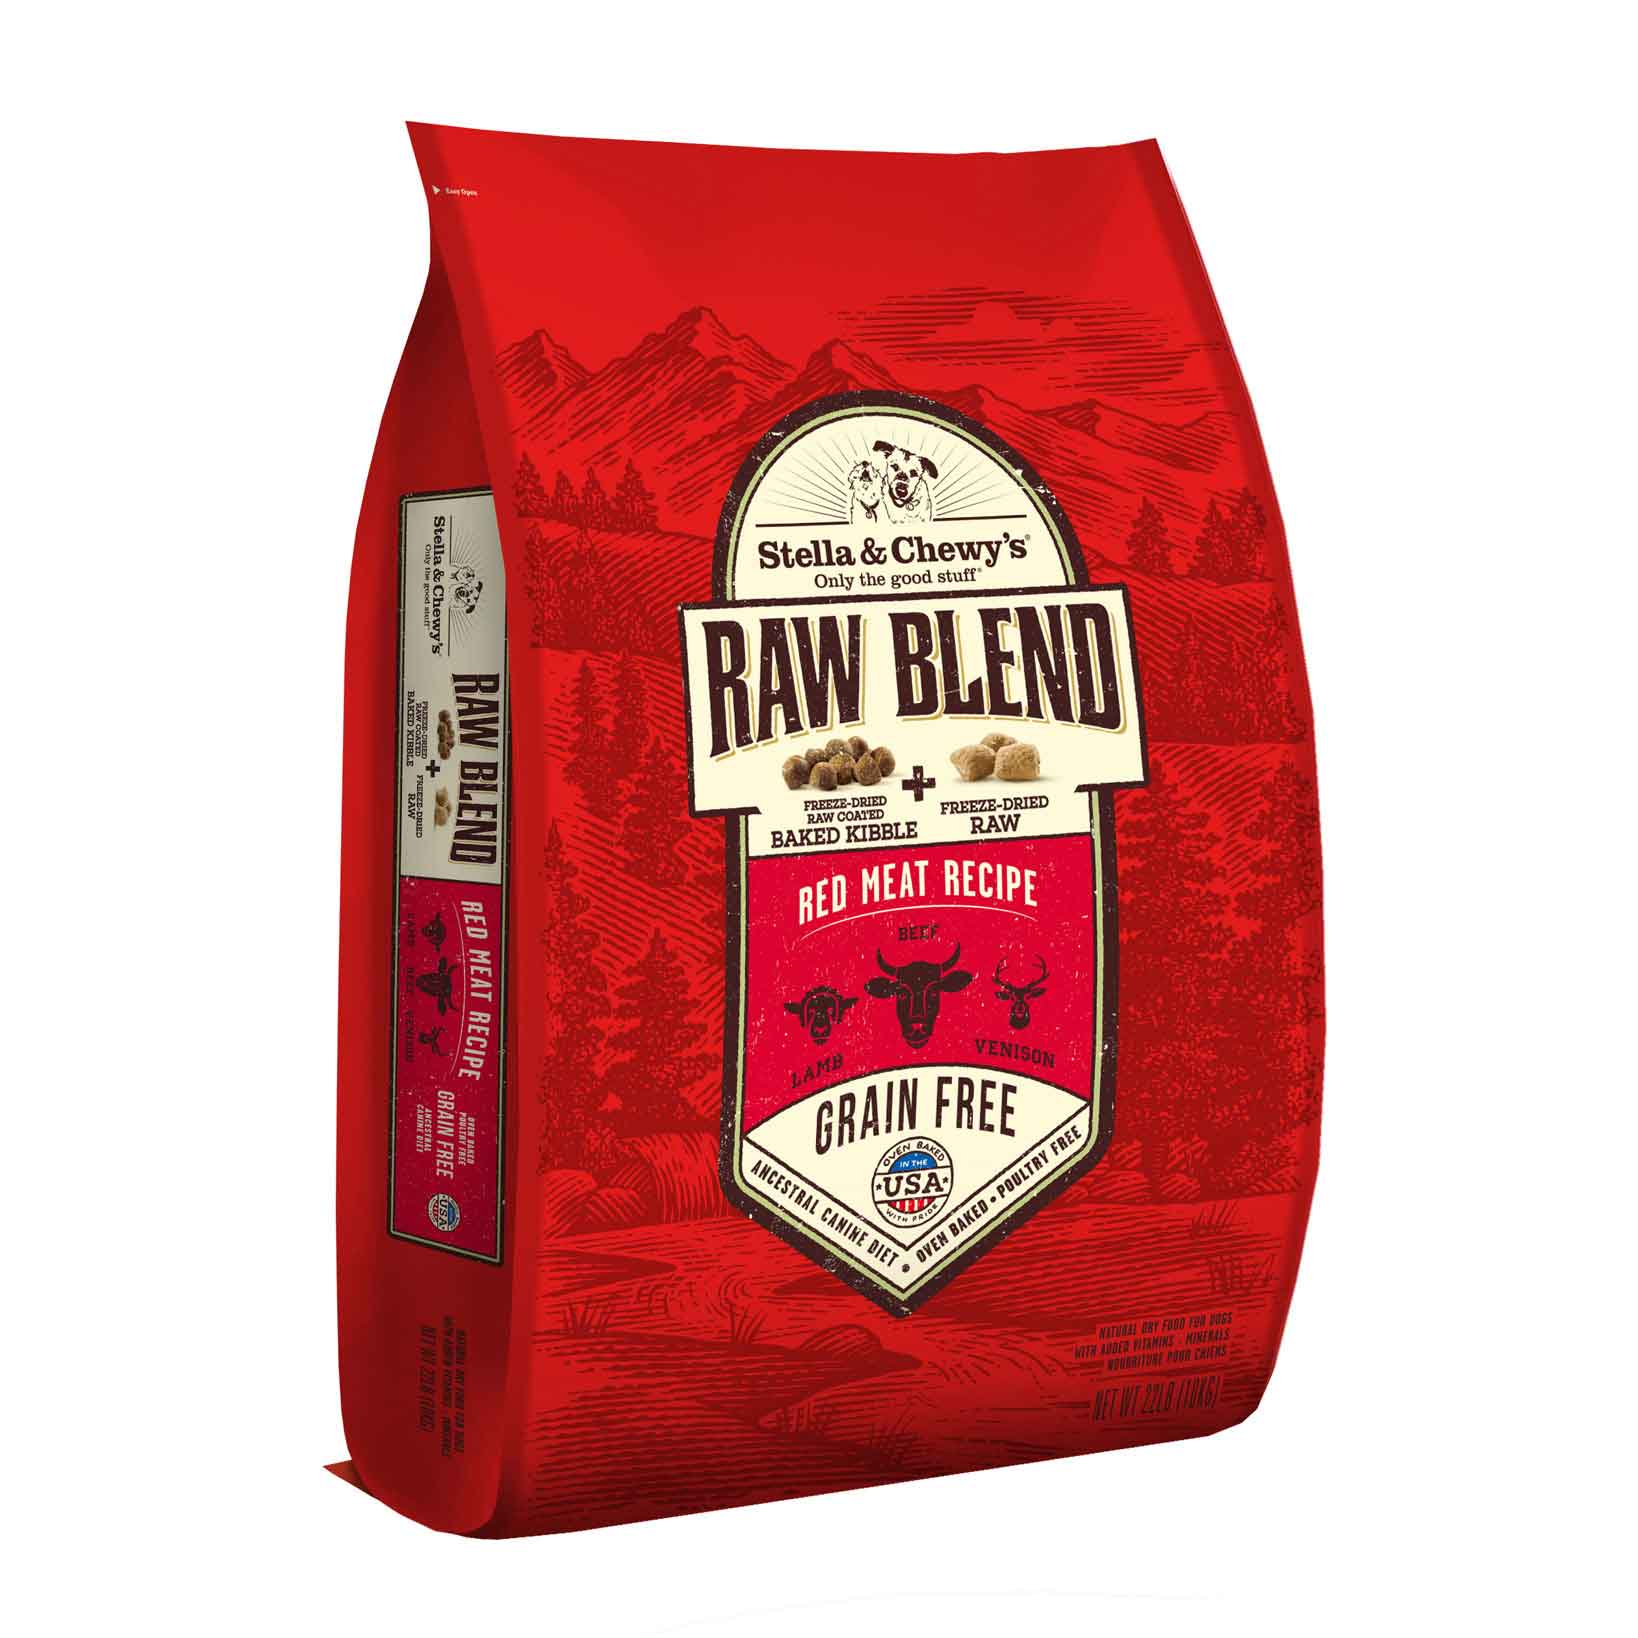 Stella & Chewy's Dog Raw Blend Kibble, Red Meat Recipe, 22 Pounds